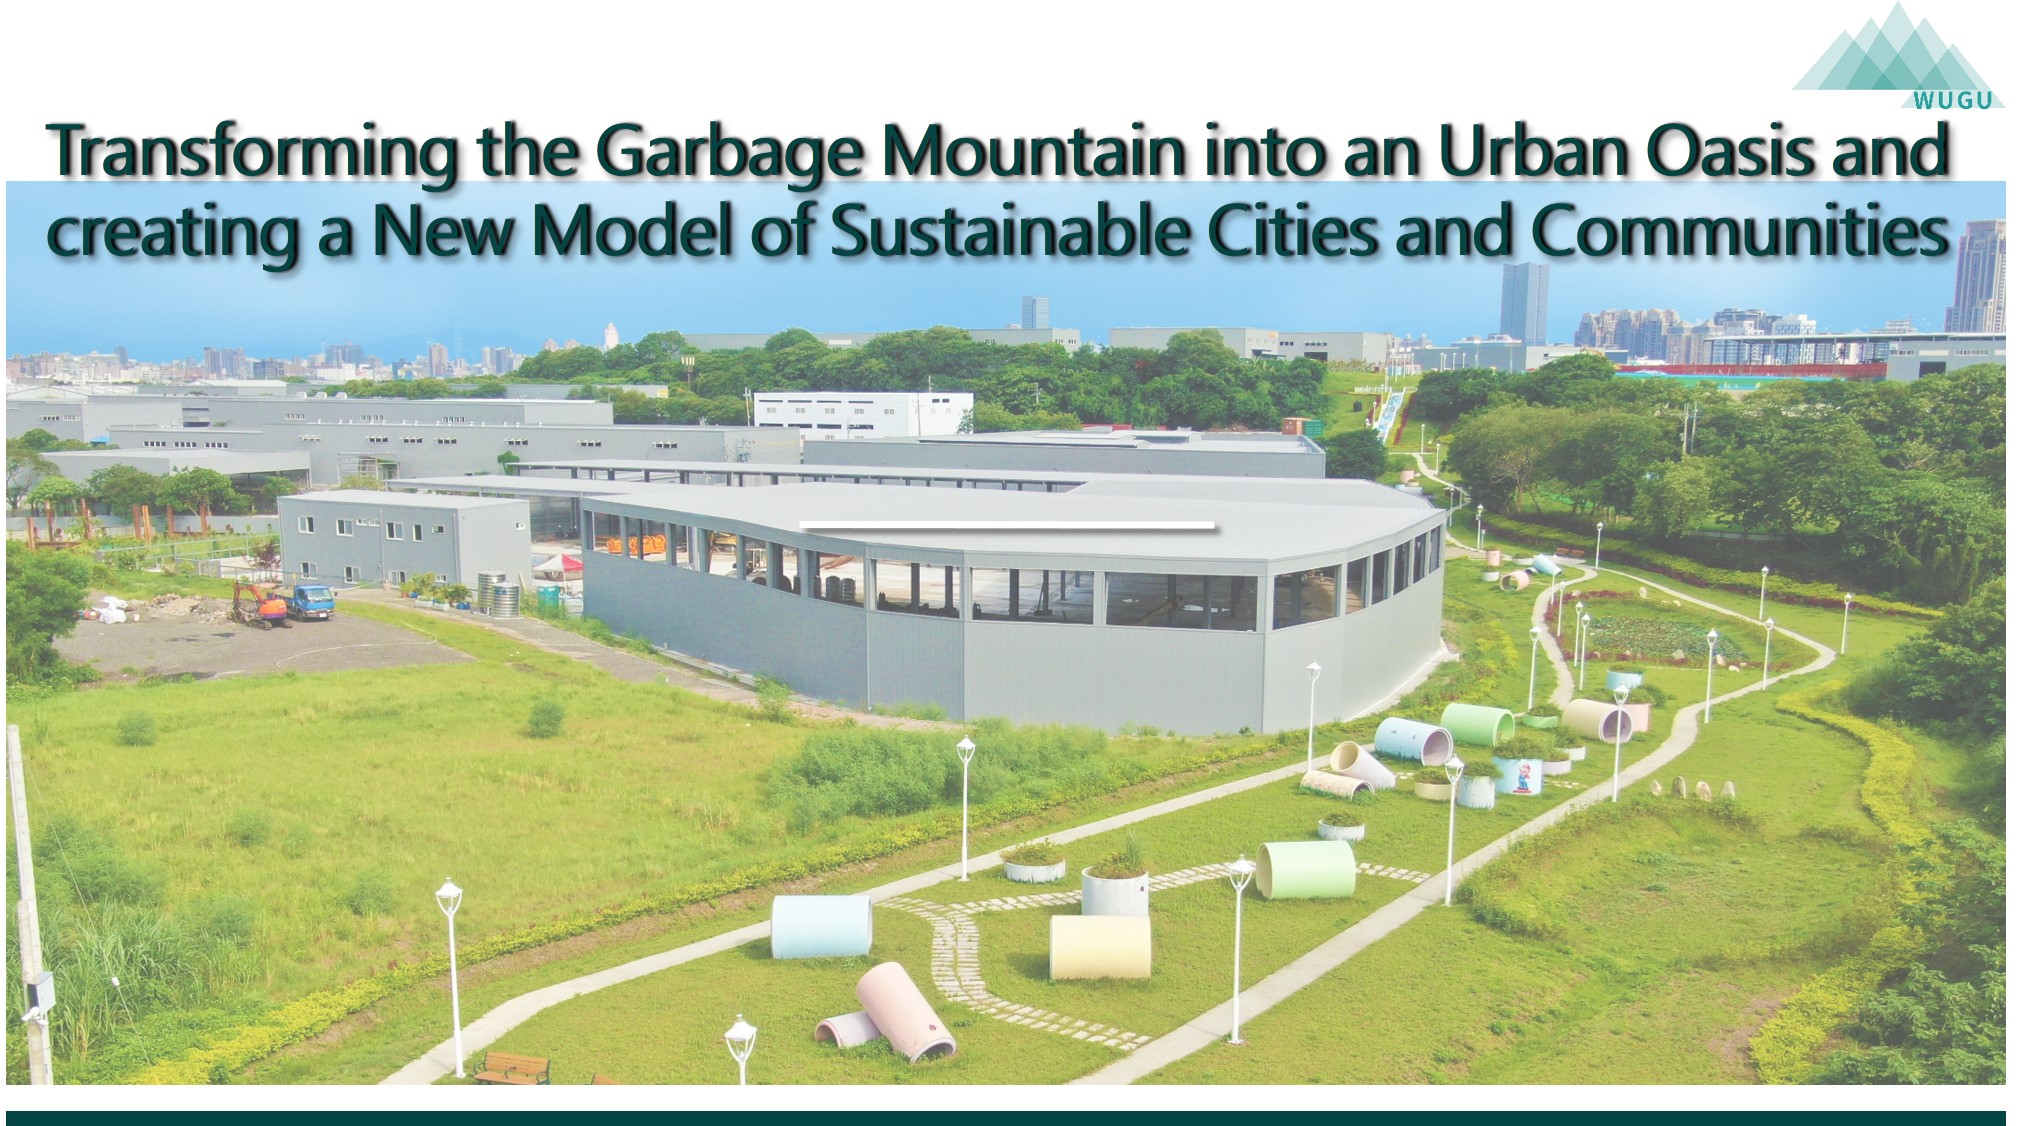 Transforming the Garbage Mountain into an Urban Oasis and creating a New Model of Sustainable Cities